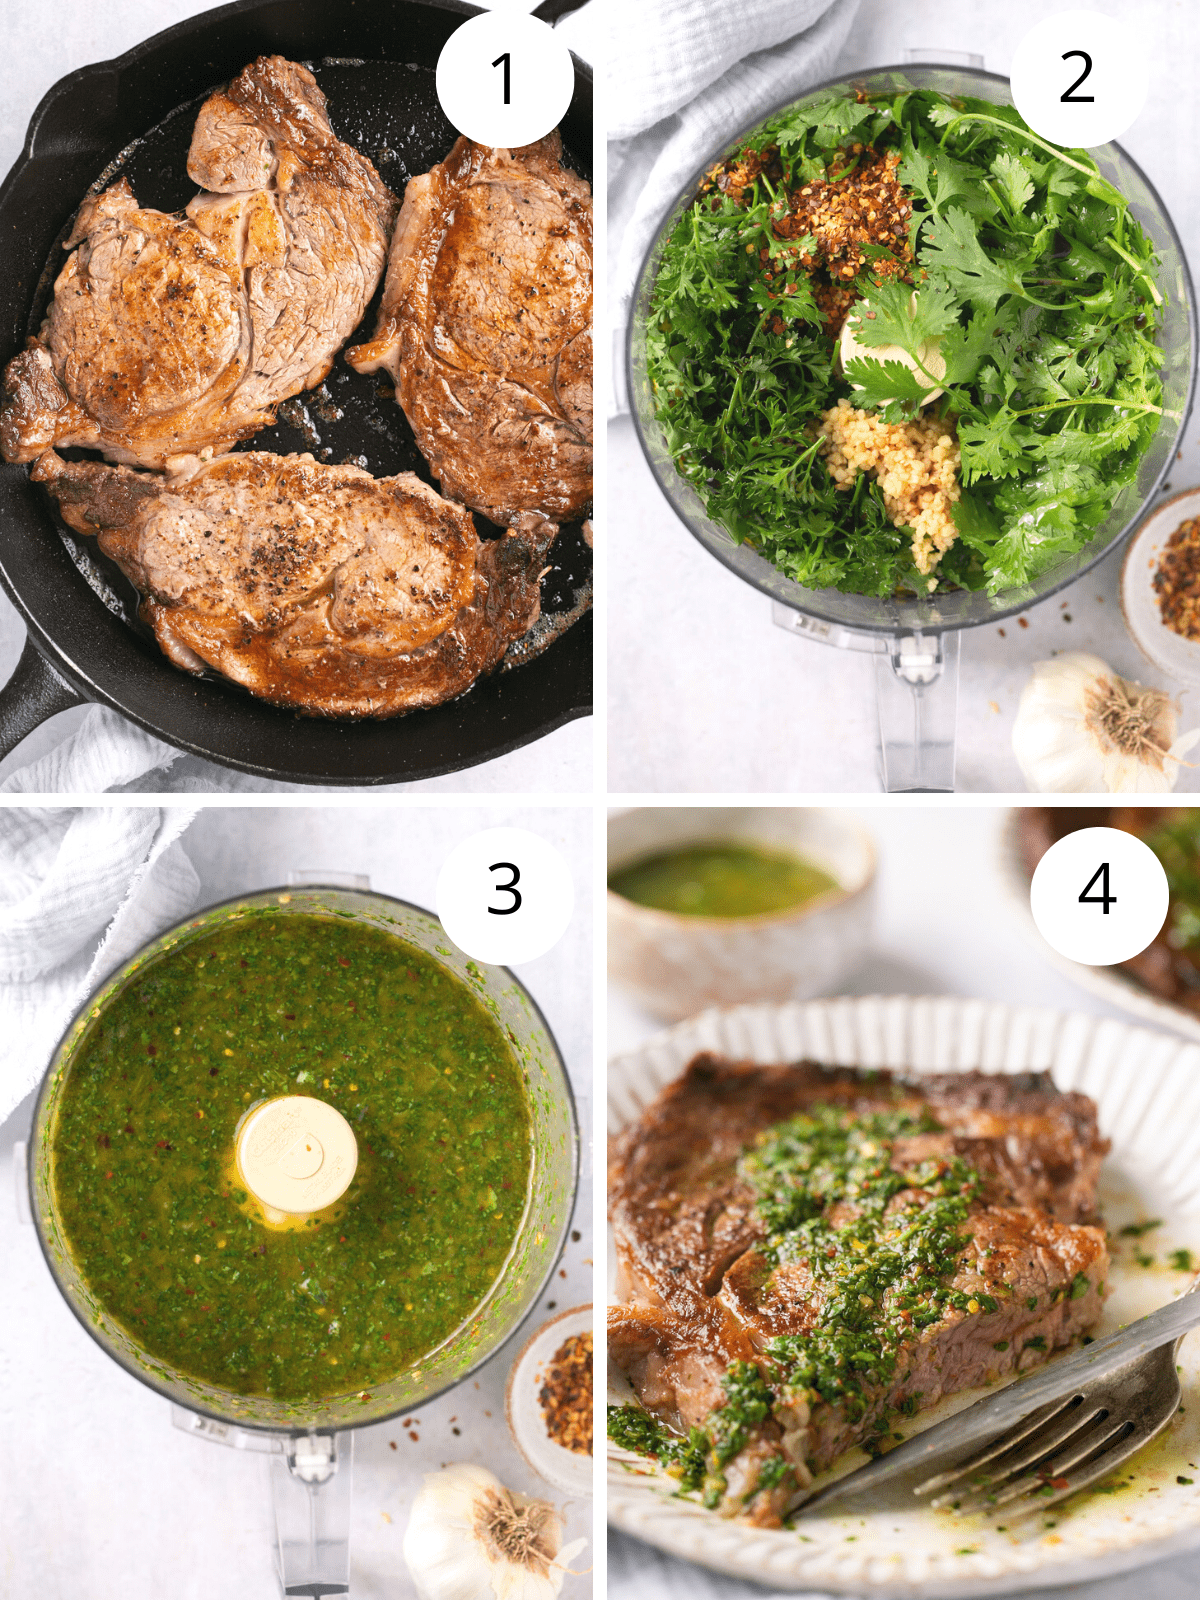 Step by step directions for cooking Denver steak in a pan and making a chimichurri sauce to top it with.